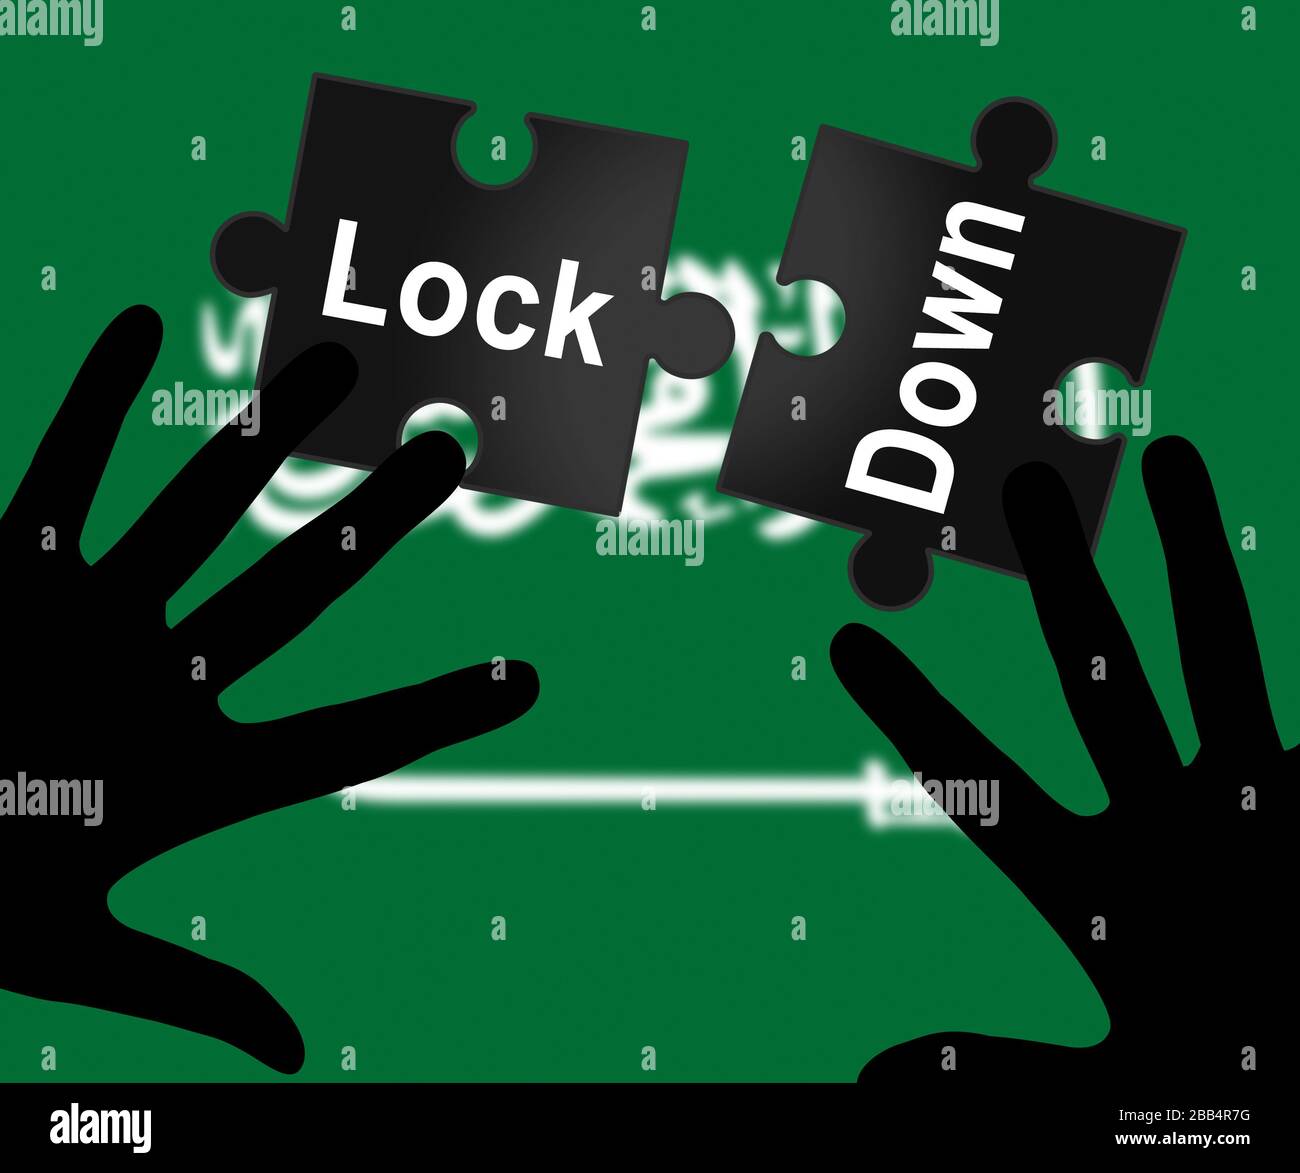 Saudi Arabia lockdown in solitary confinement or stay home. Arabian lock down from covid-19 pandemic - 3d Illustration Stock Photo